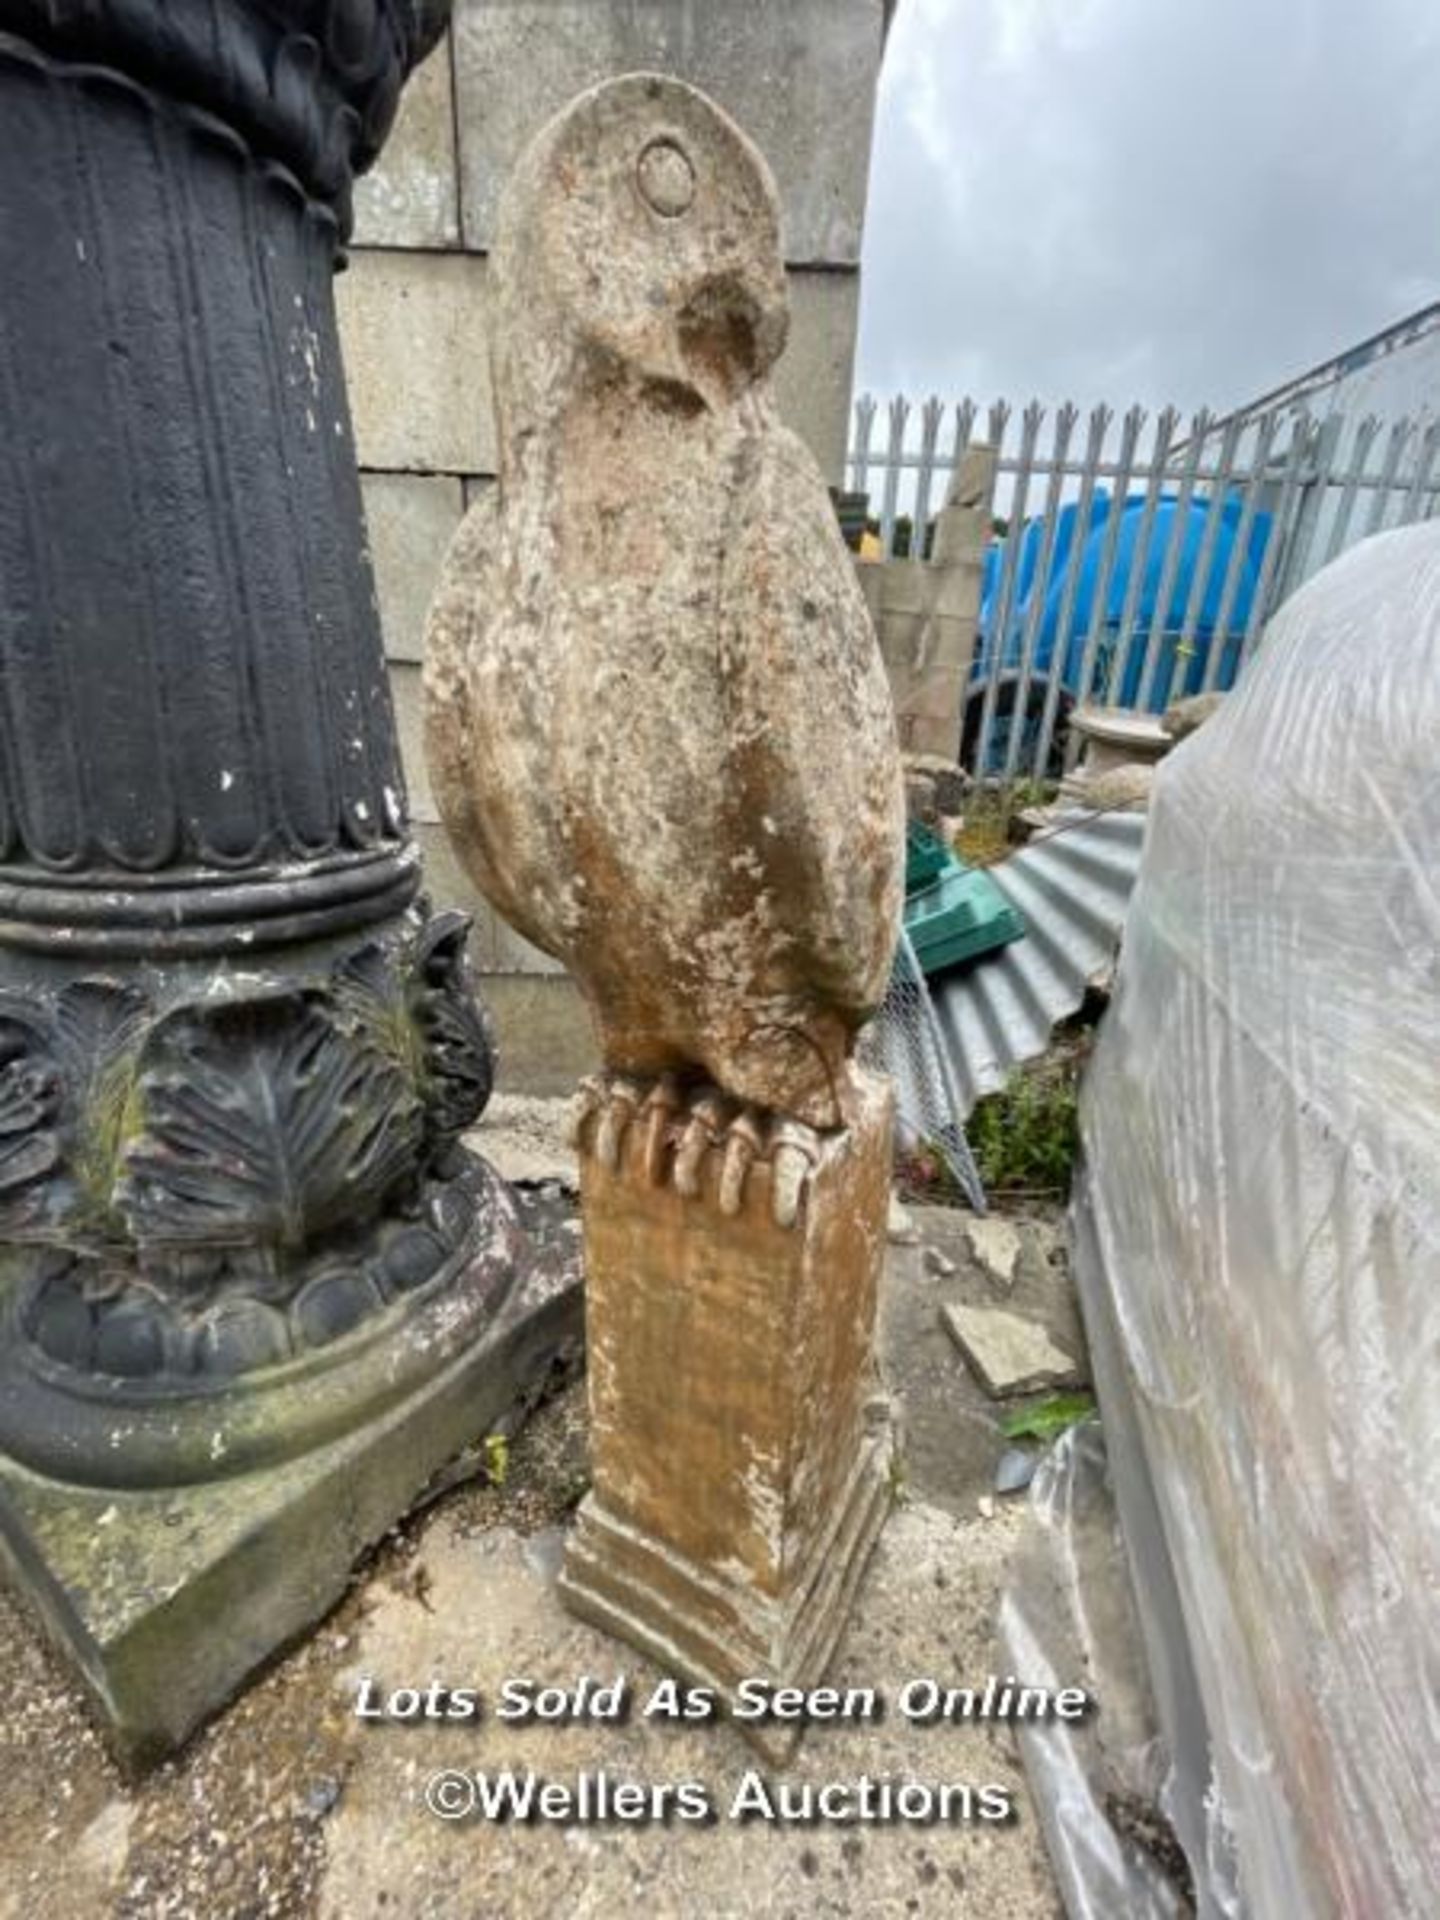 *RECONSTITUTED STONE OWL ON PLINTH, 91CM (H) / COLLECTION LOCATION: ALBOURNE (BN6), FULL ADDRESS AND